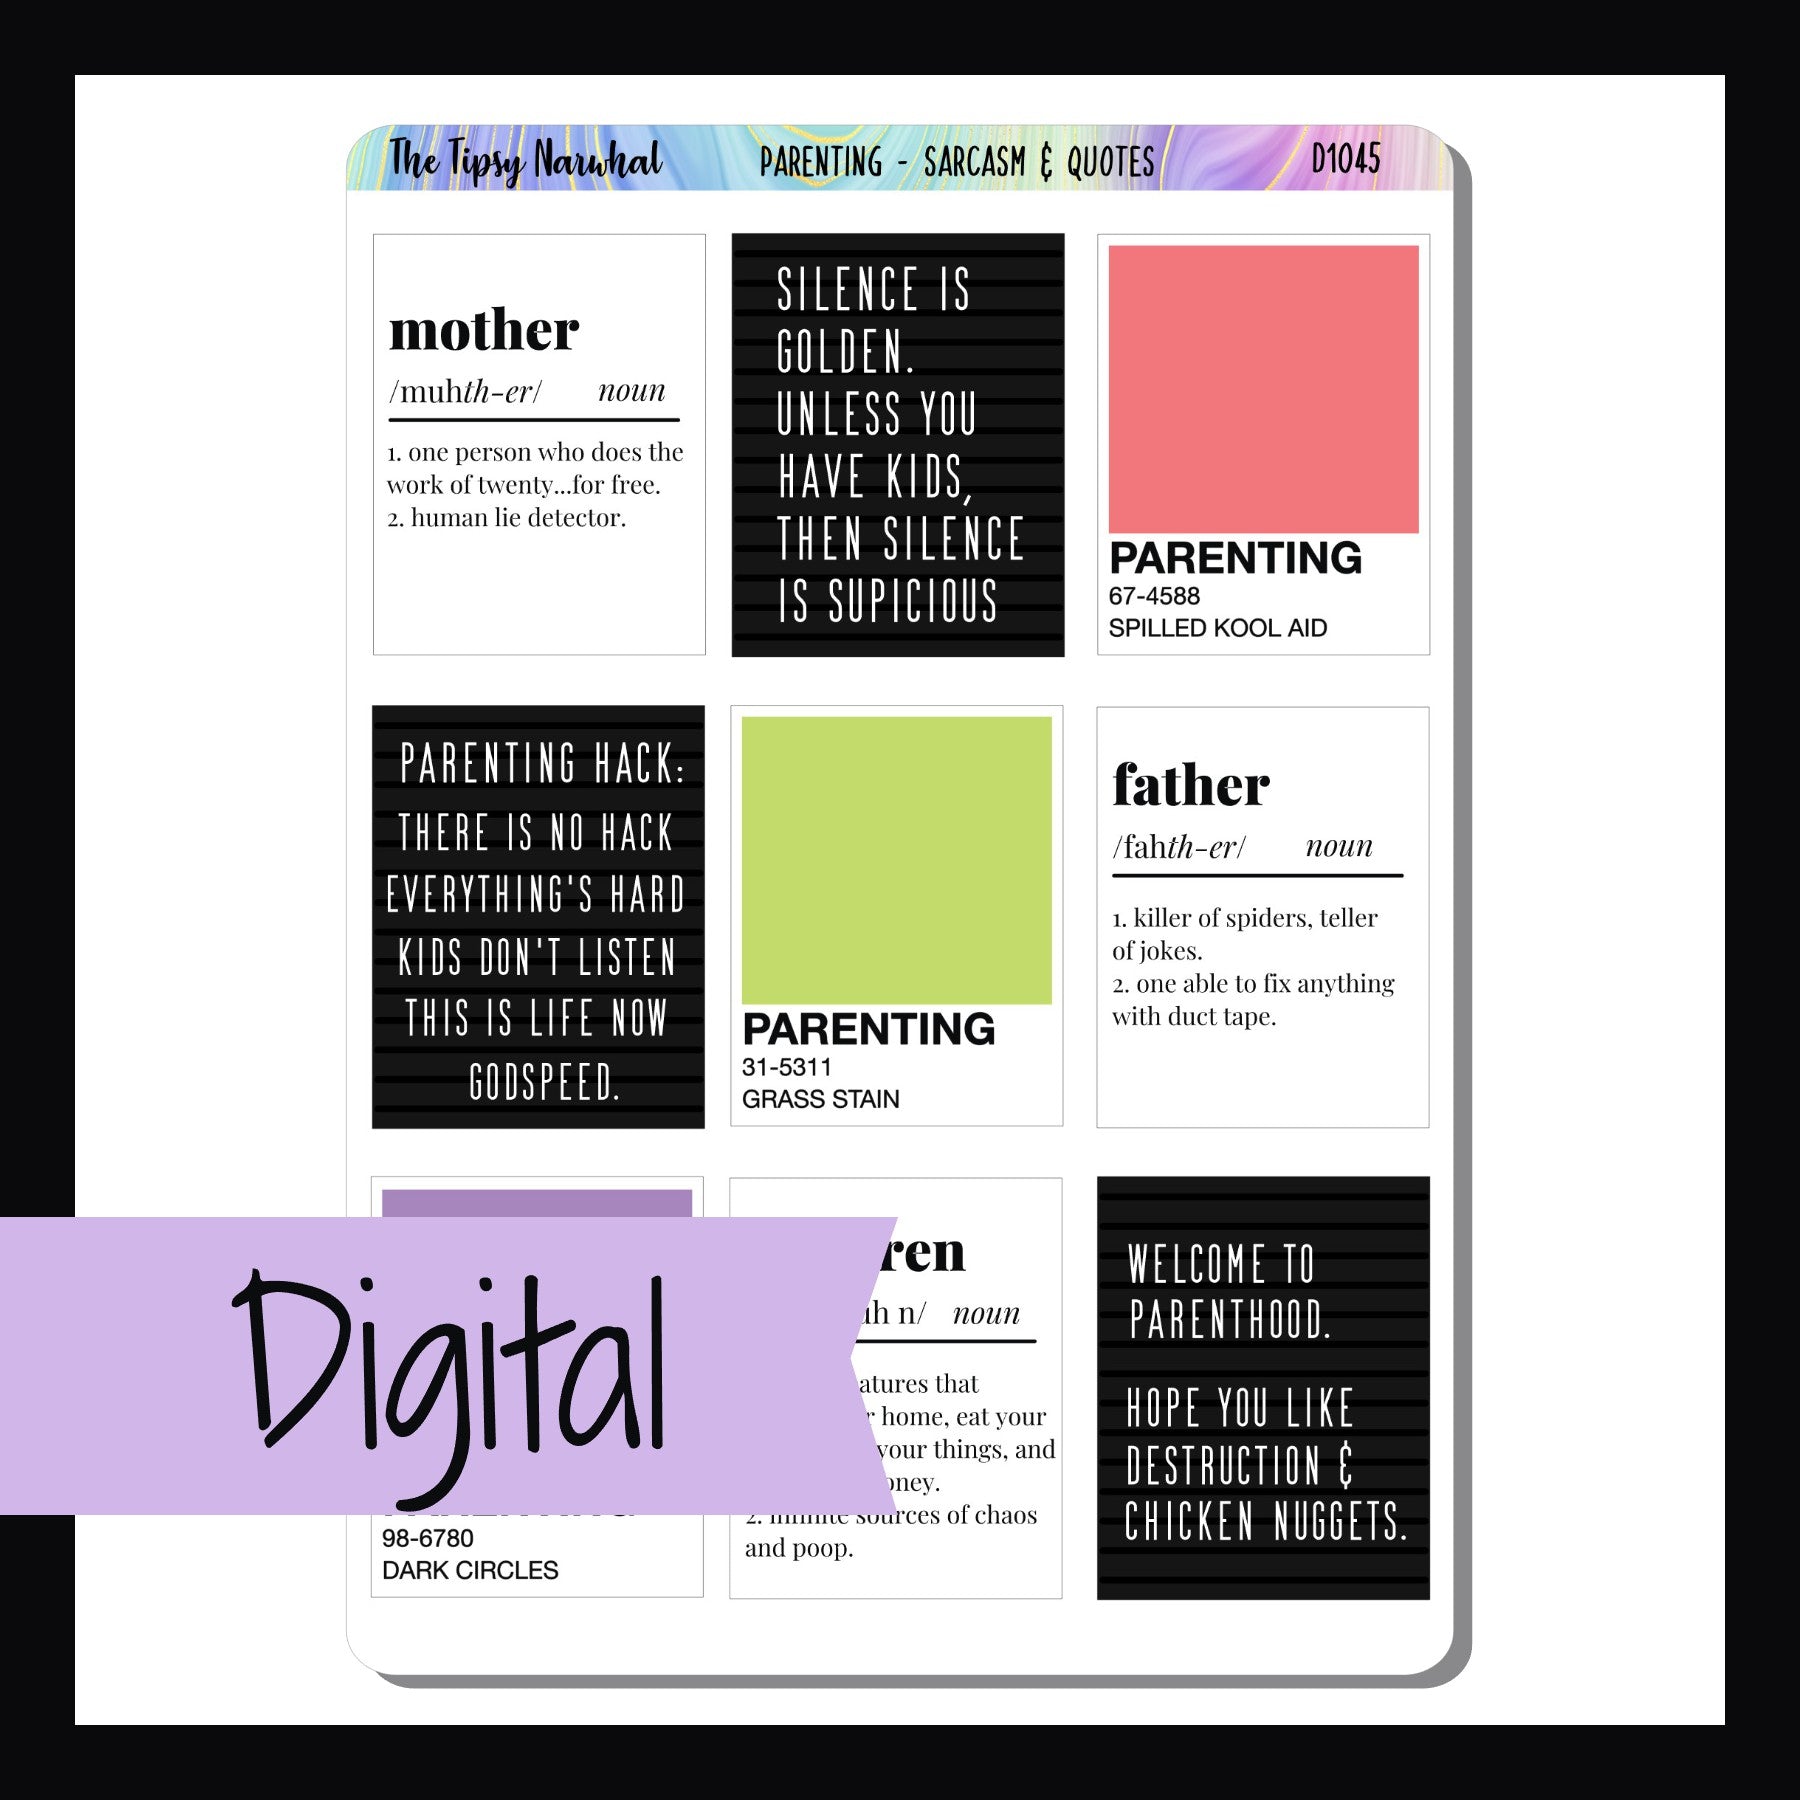 The Digital Parenting Sarcasm Sticker Sheet is a printable version of the parenting sarcasm sticker sheet.  It features 9 stickers featuring funny quotes about being a parent.